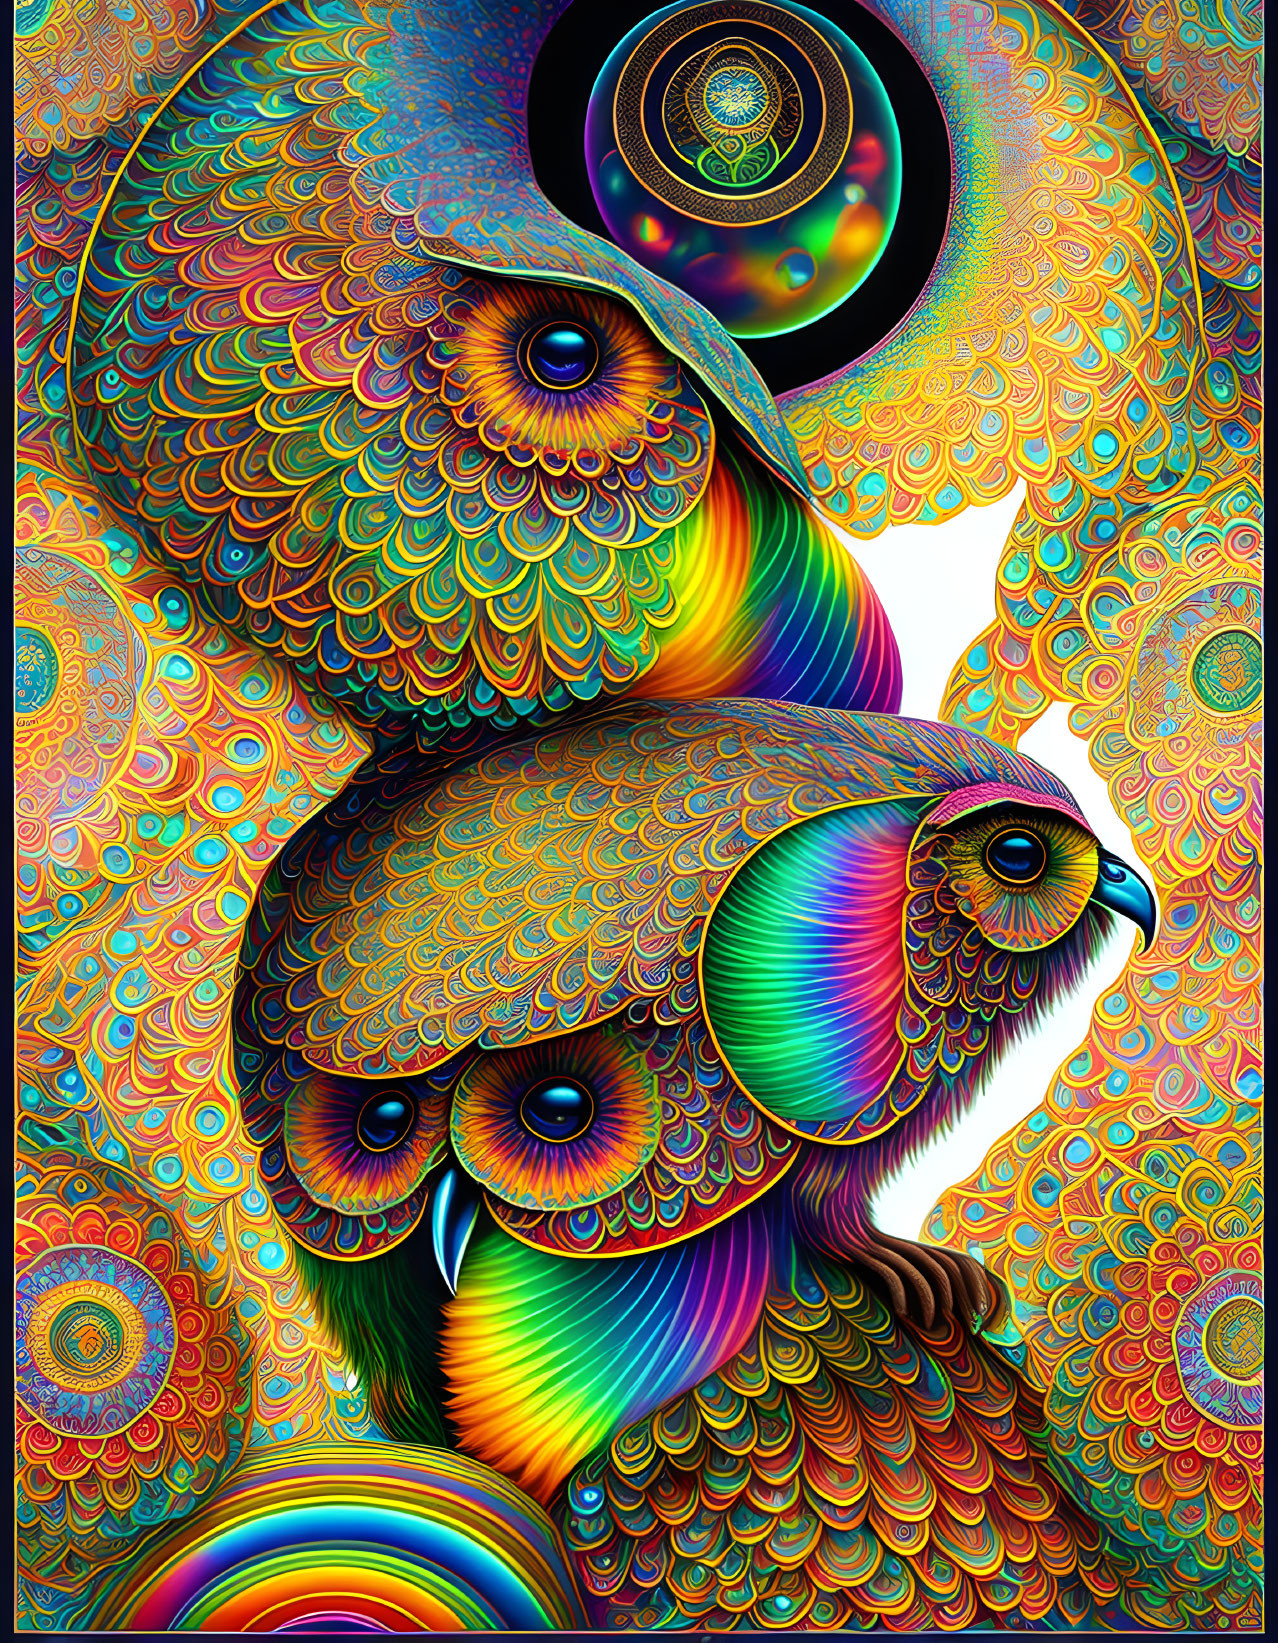 Psychedelic owls from another planet 